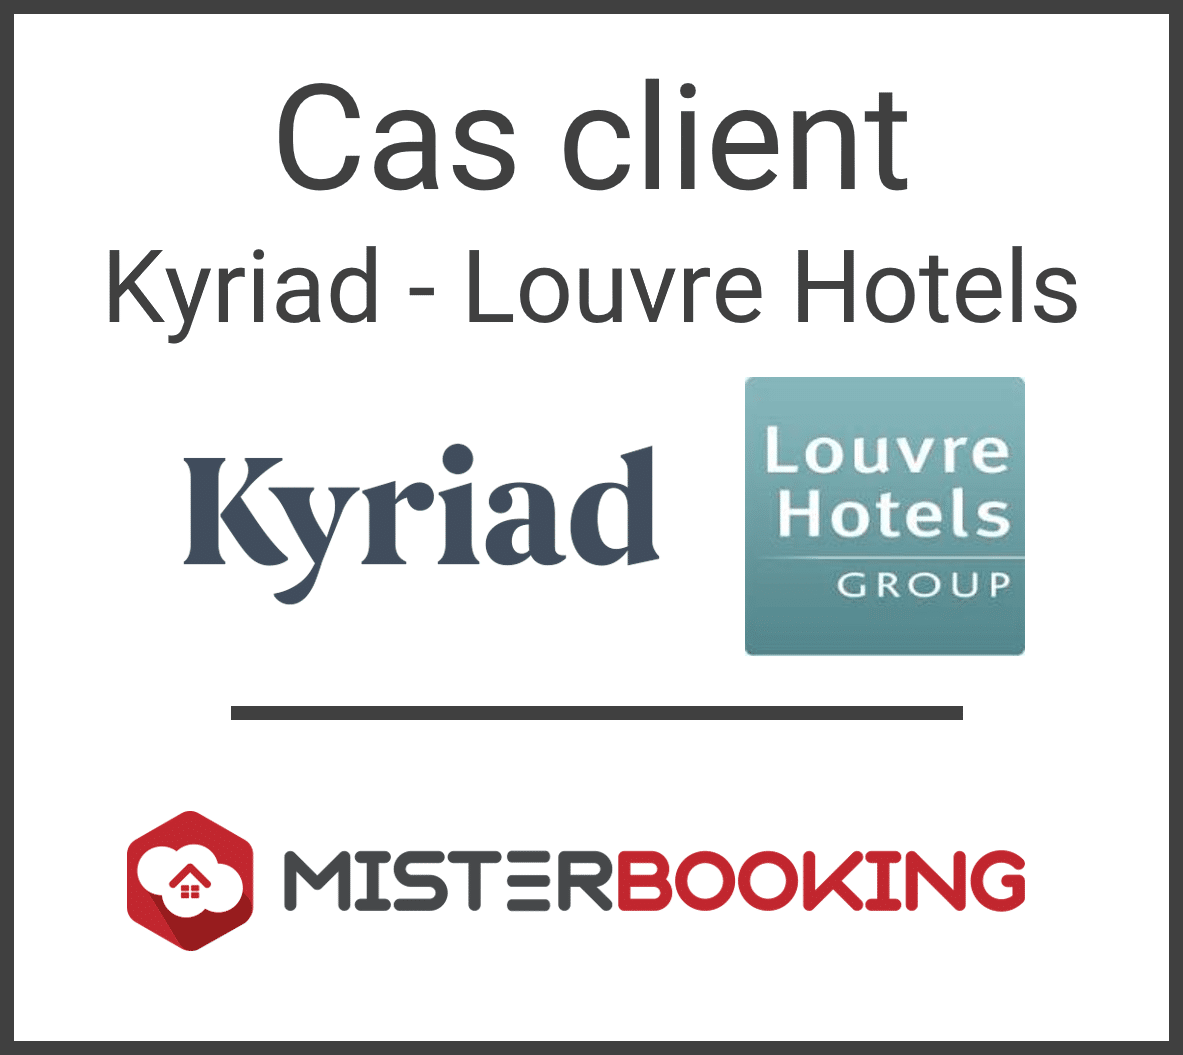 Cas client Louvre Hotels Group : Kyriad Auray